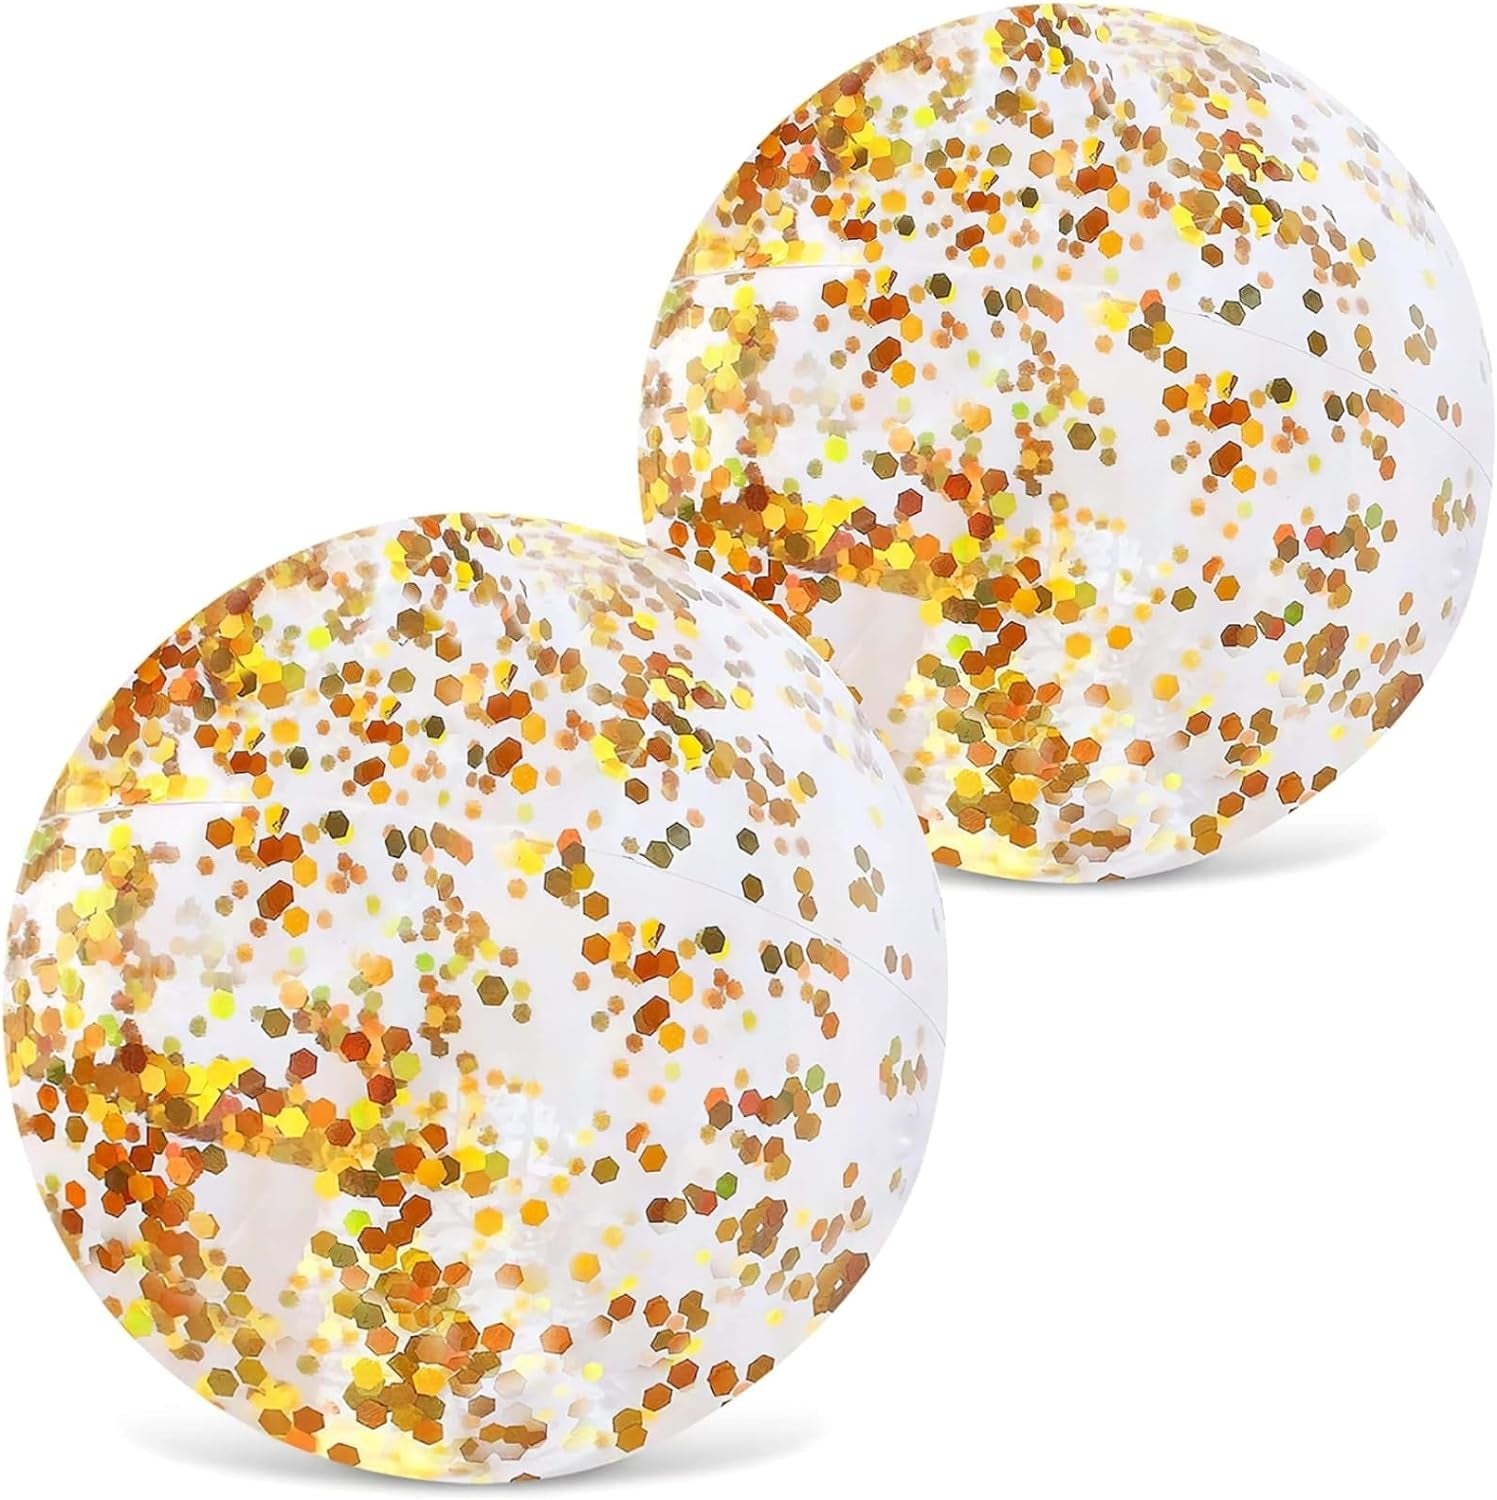 2PCS Inflatable Beach Balls, Glitter Beach Ball 16 Inch Clear Inflatable Ball with Gold Confetti for Kids Birthday Summer Pool Party